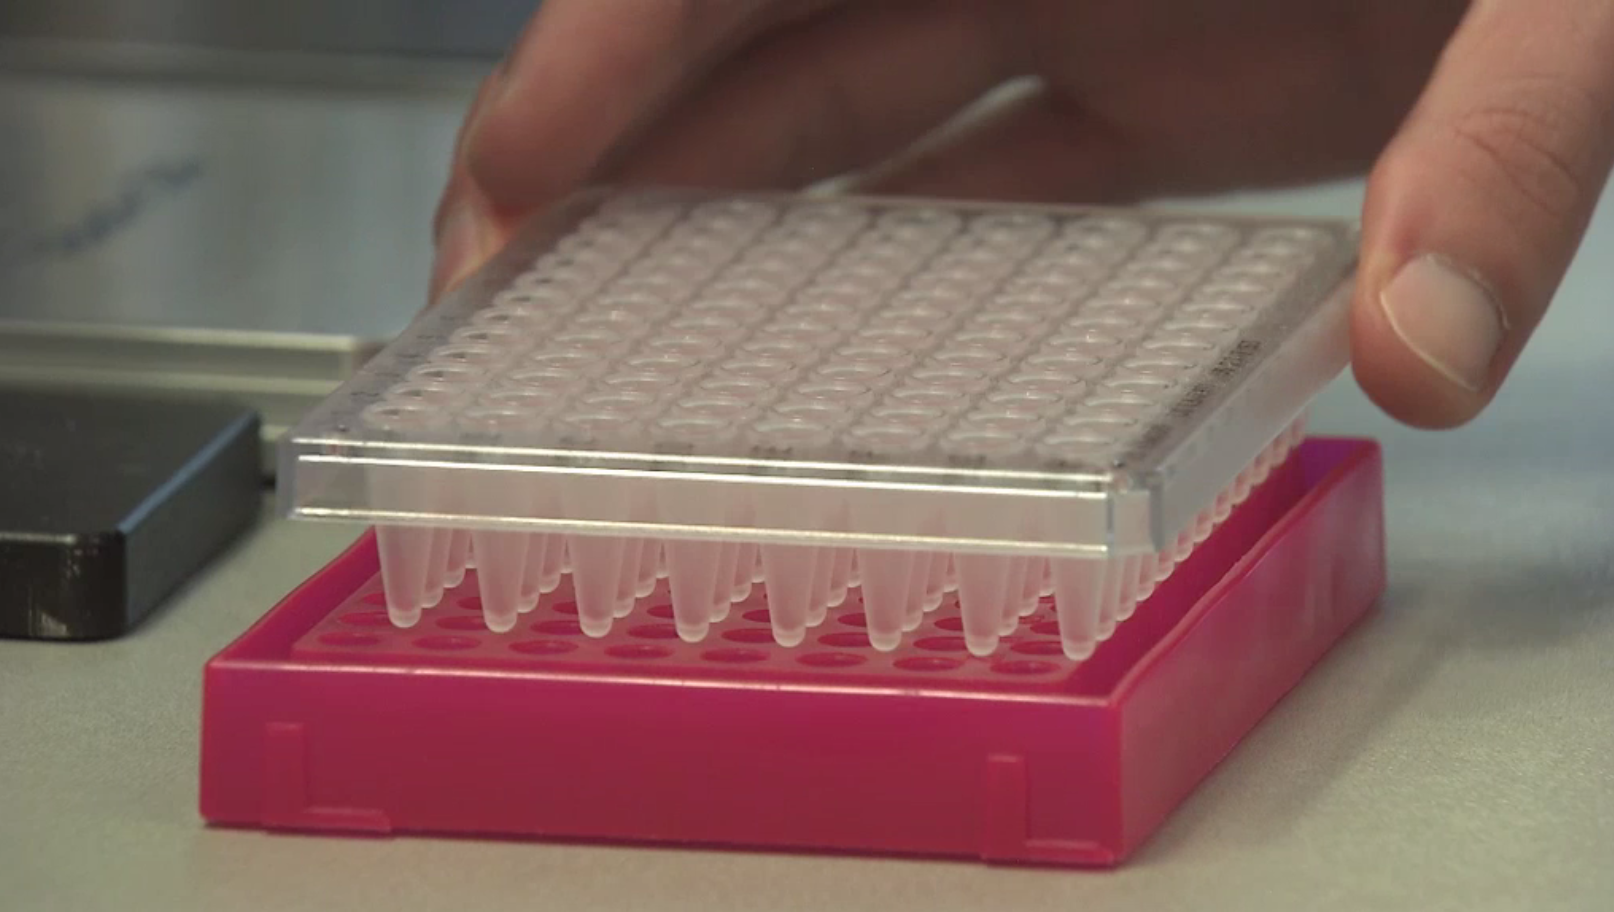 New batch of DNA samples for whole genome sequencing